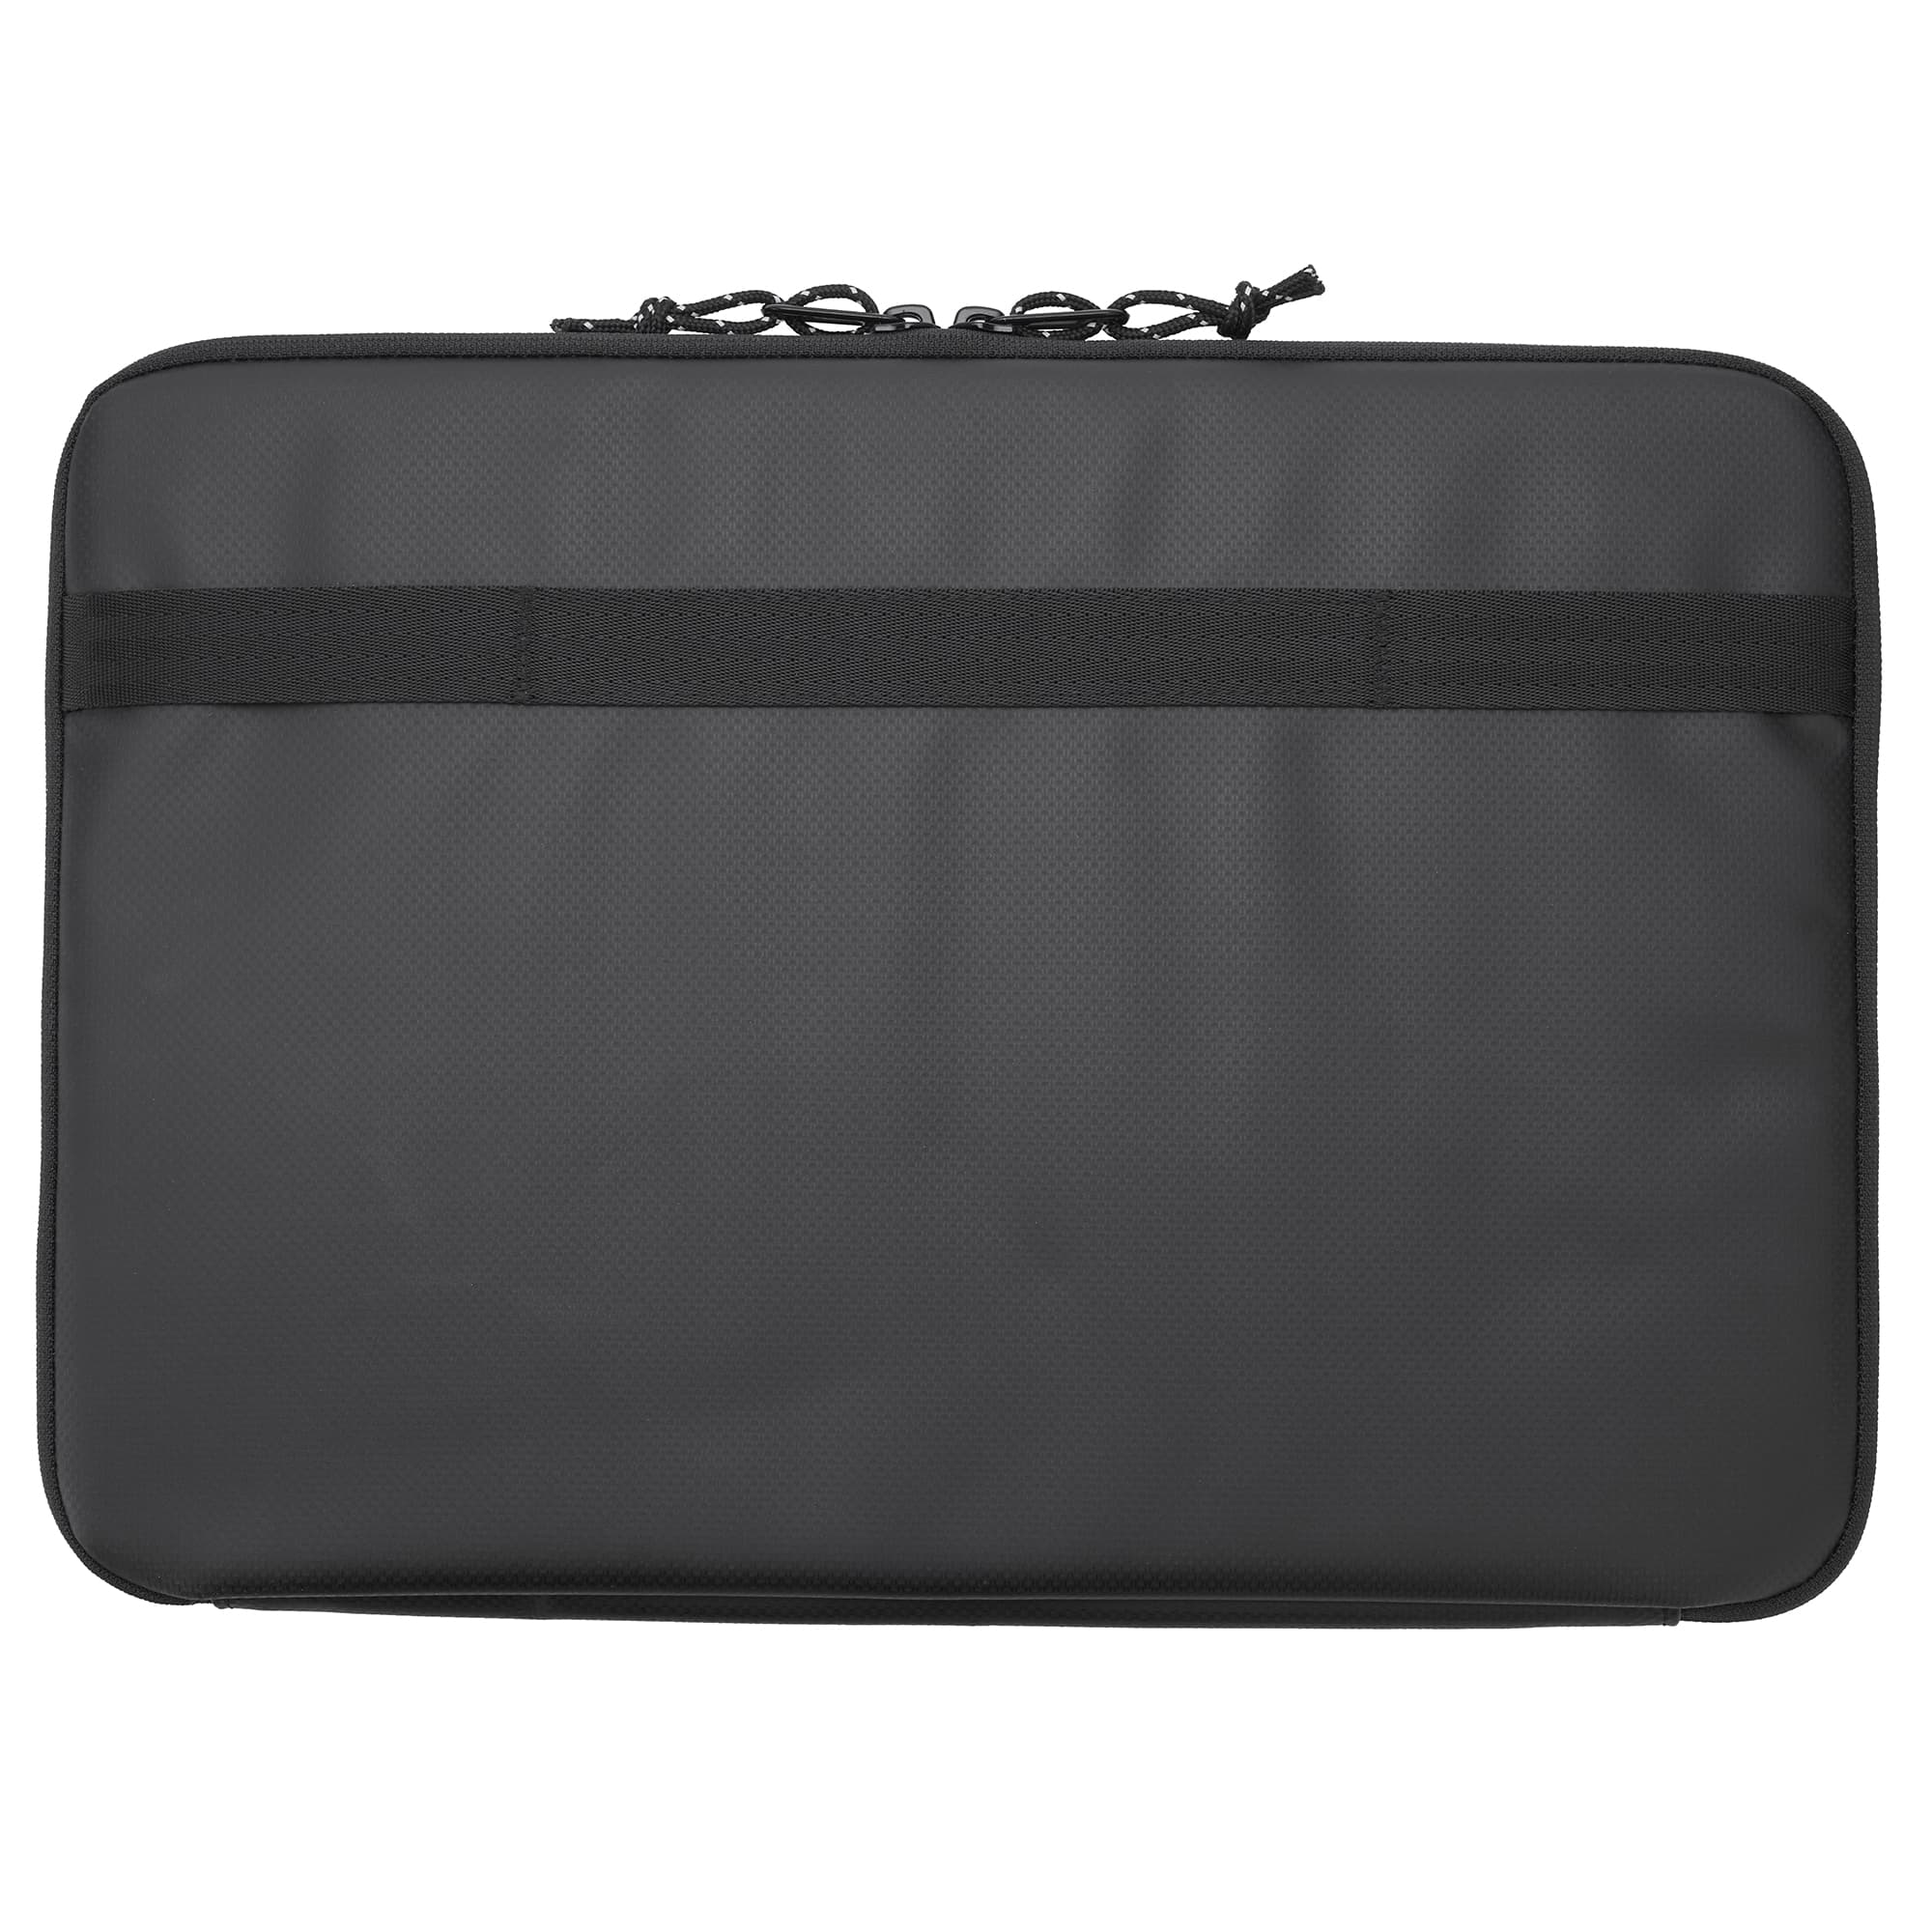 Padded laptop sleeve for computers up to 15" back view